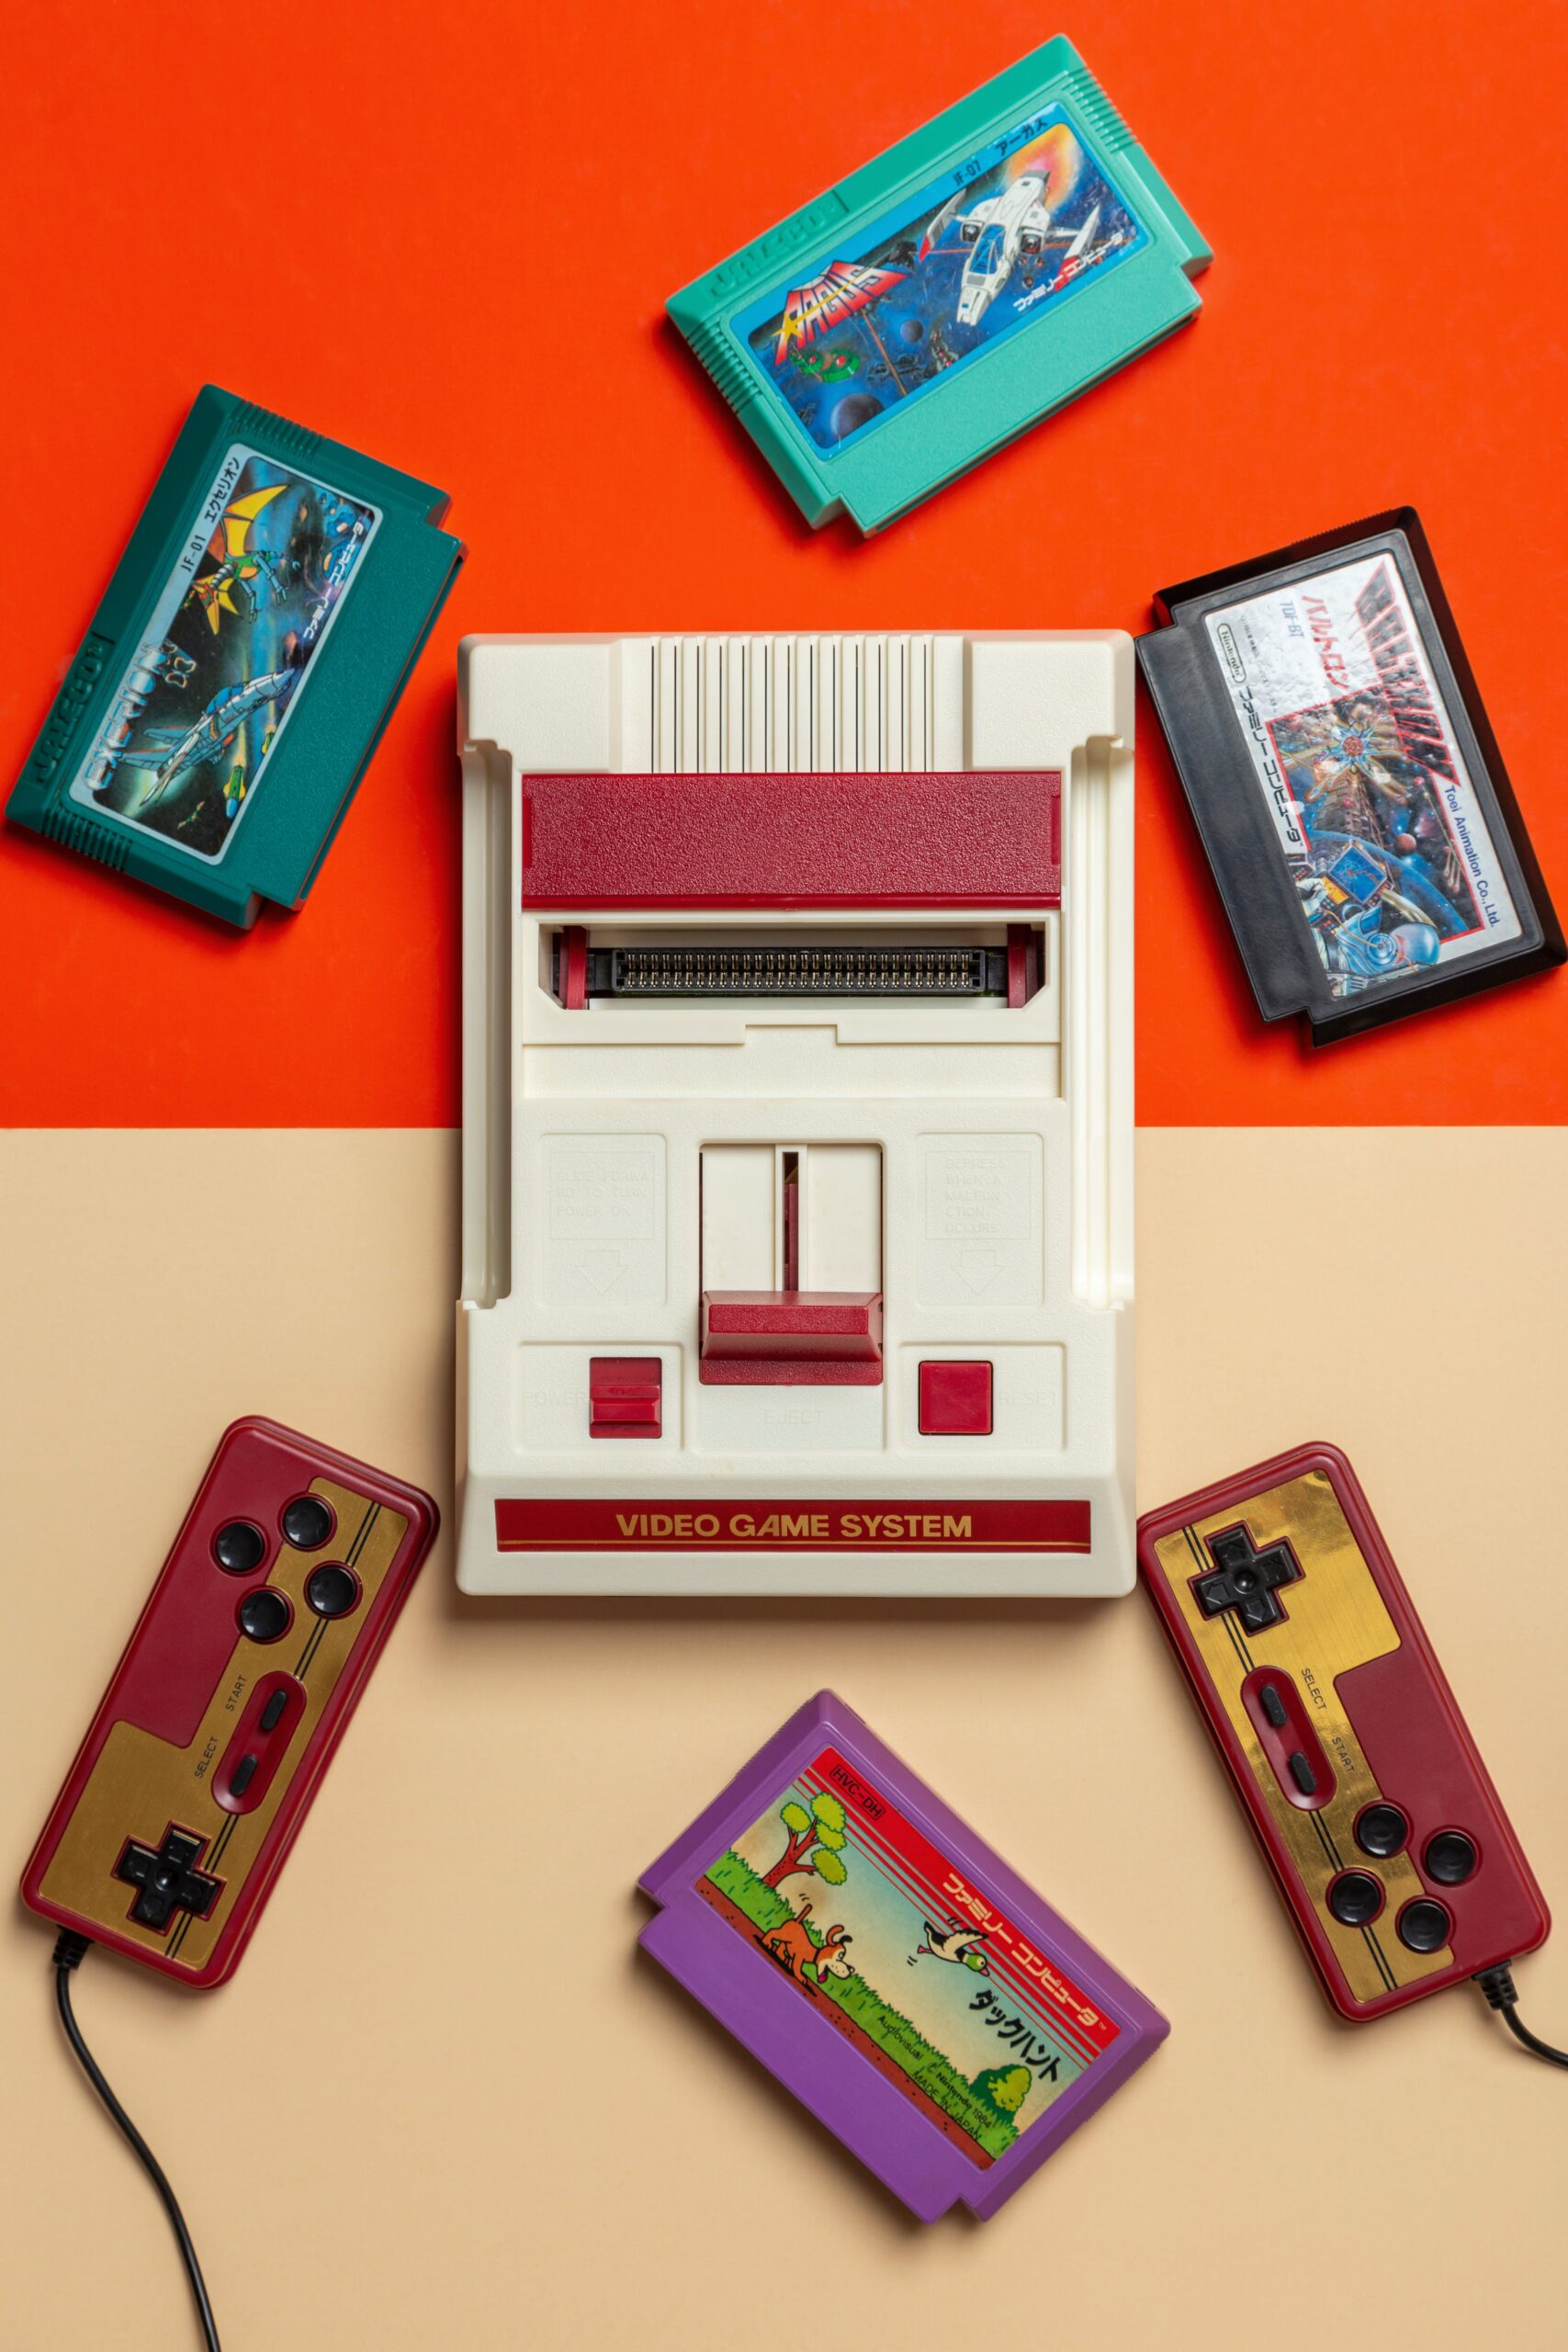 Retro Gaming: Keeping Classic Games Alive